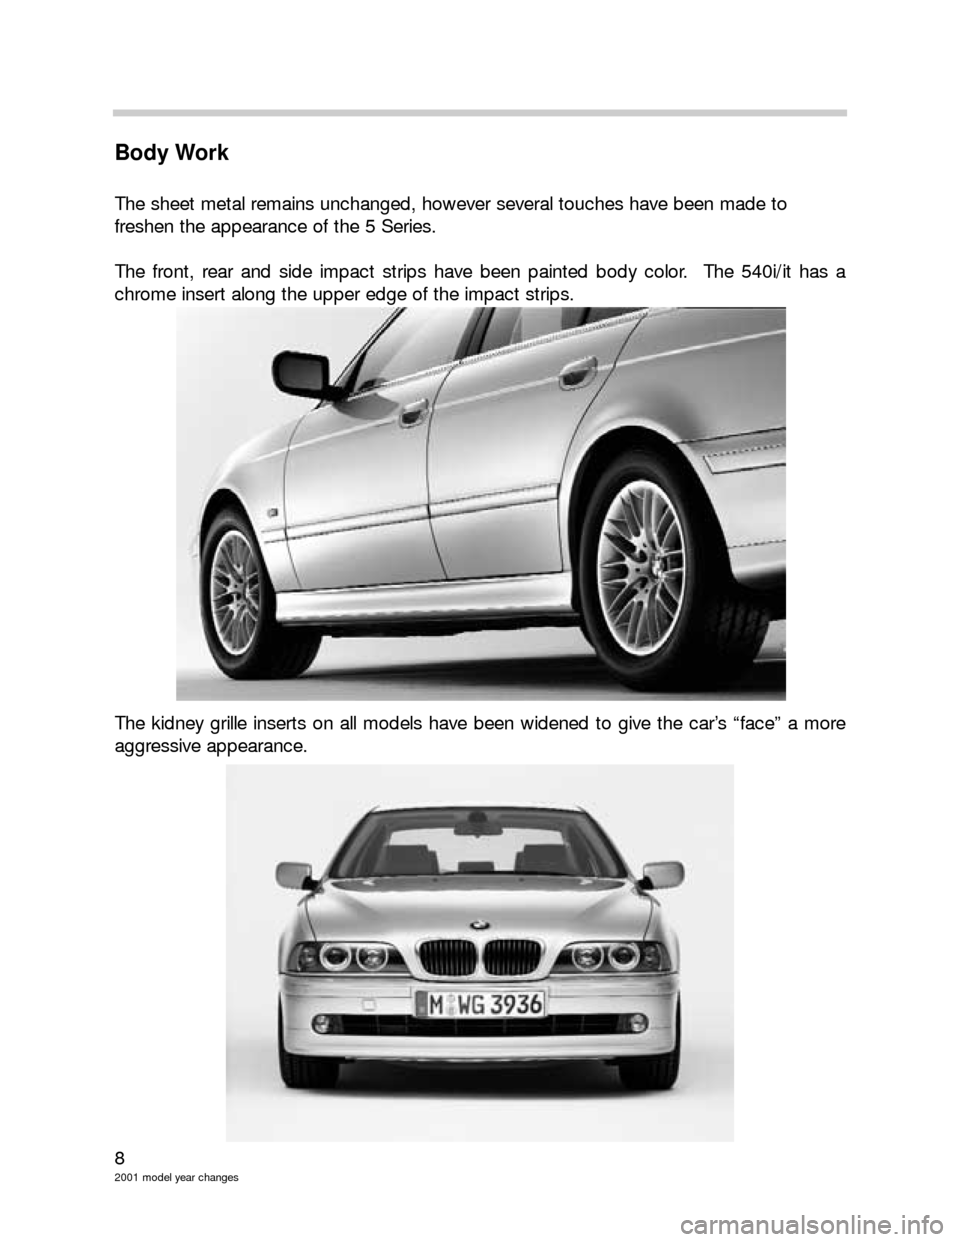 BMW 3 SERIES 2001 E46 Model Yar Changes 8
2001 model year changes
Body Work
The sheet metal remains unchanged, however several touches have been made to 
freshen the appearance of the 5 Series.
The front, rear and side impact strips have be